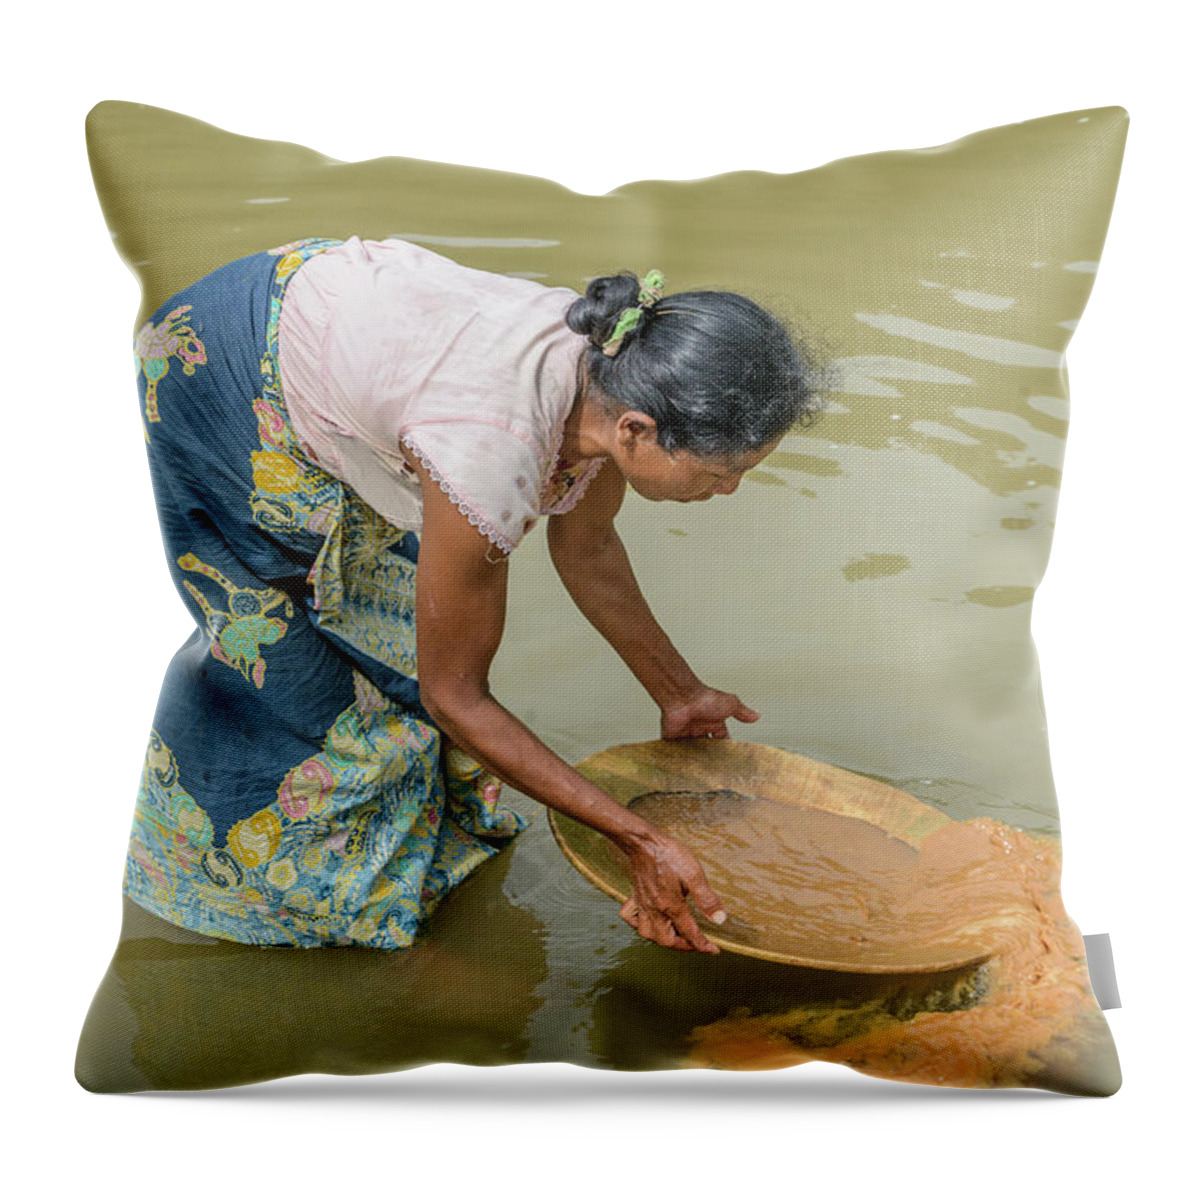 People Throw Pillow featuring the photograph Gold Panning 2 by Werner Padarin